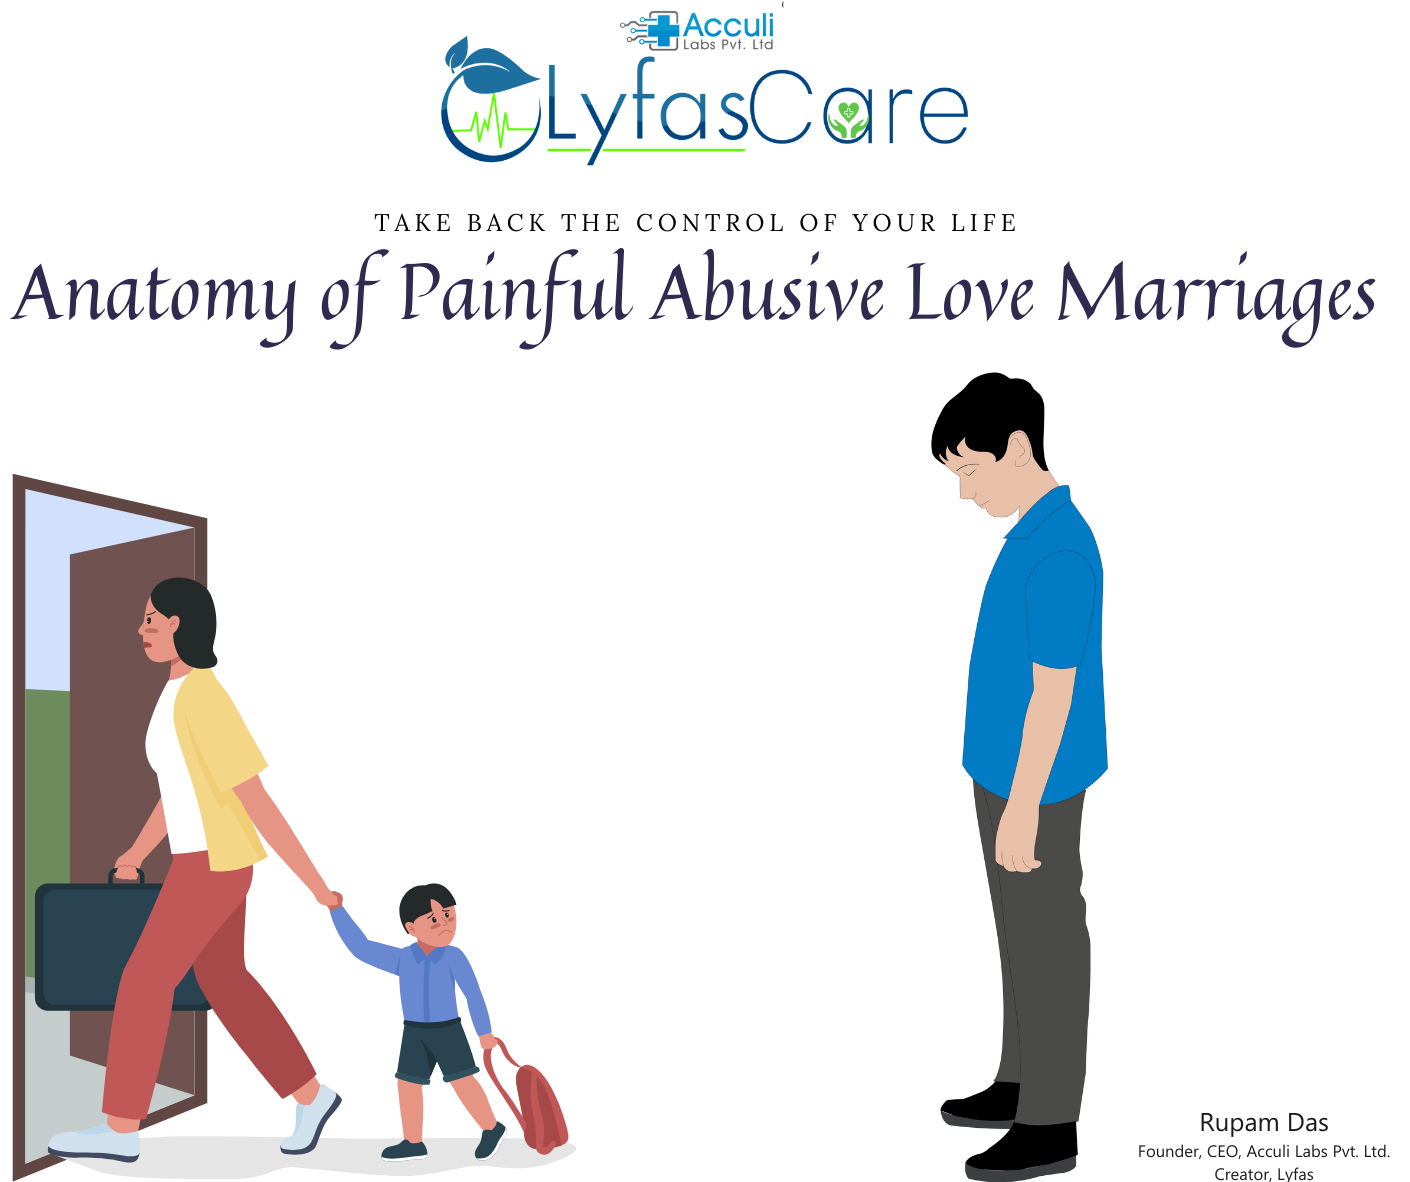 Anatomy of Painful Abusive Love Marriages Rupam Acculi Lyfas Care. How love marriages turn into abusive marriages? Why 73% of all divorces are filled by women? Can a broken marriage be fixed? Identify abusive marriage anatomy.